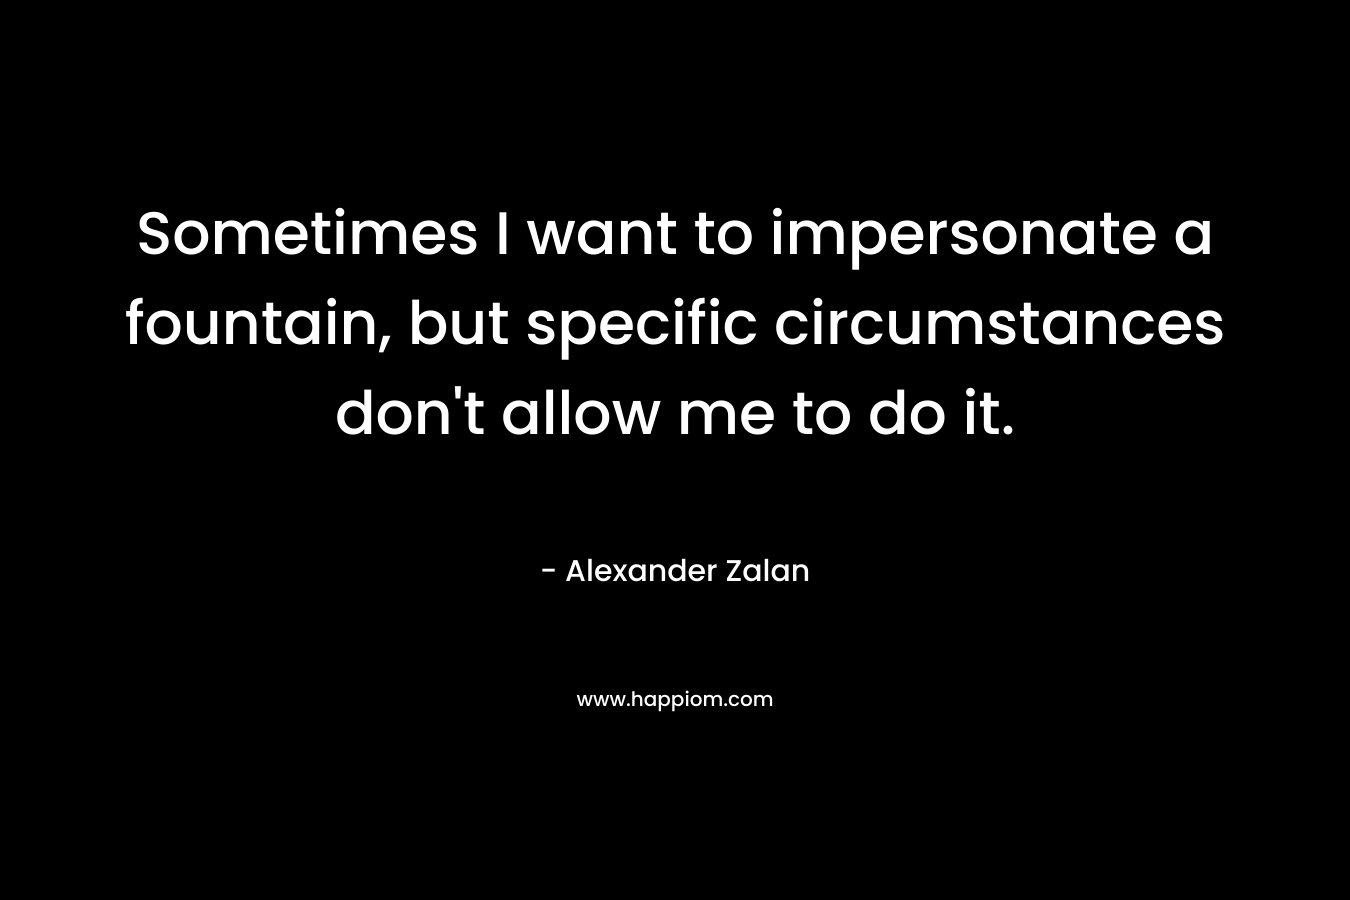 Sometimes I want to impersonate a fountain, but specific circumstances don’t allow me to do it. – Alexander Zalan